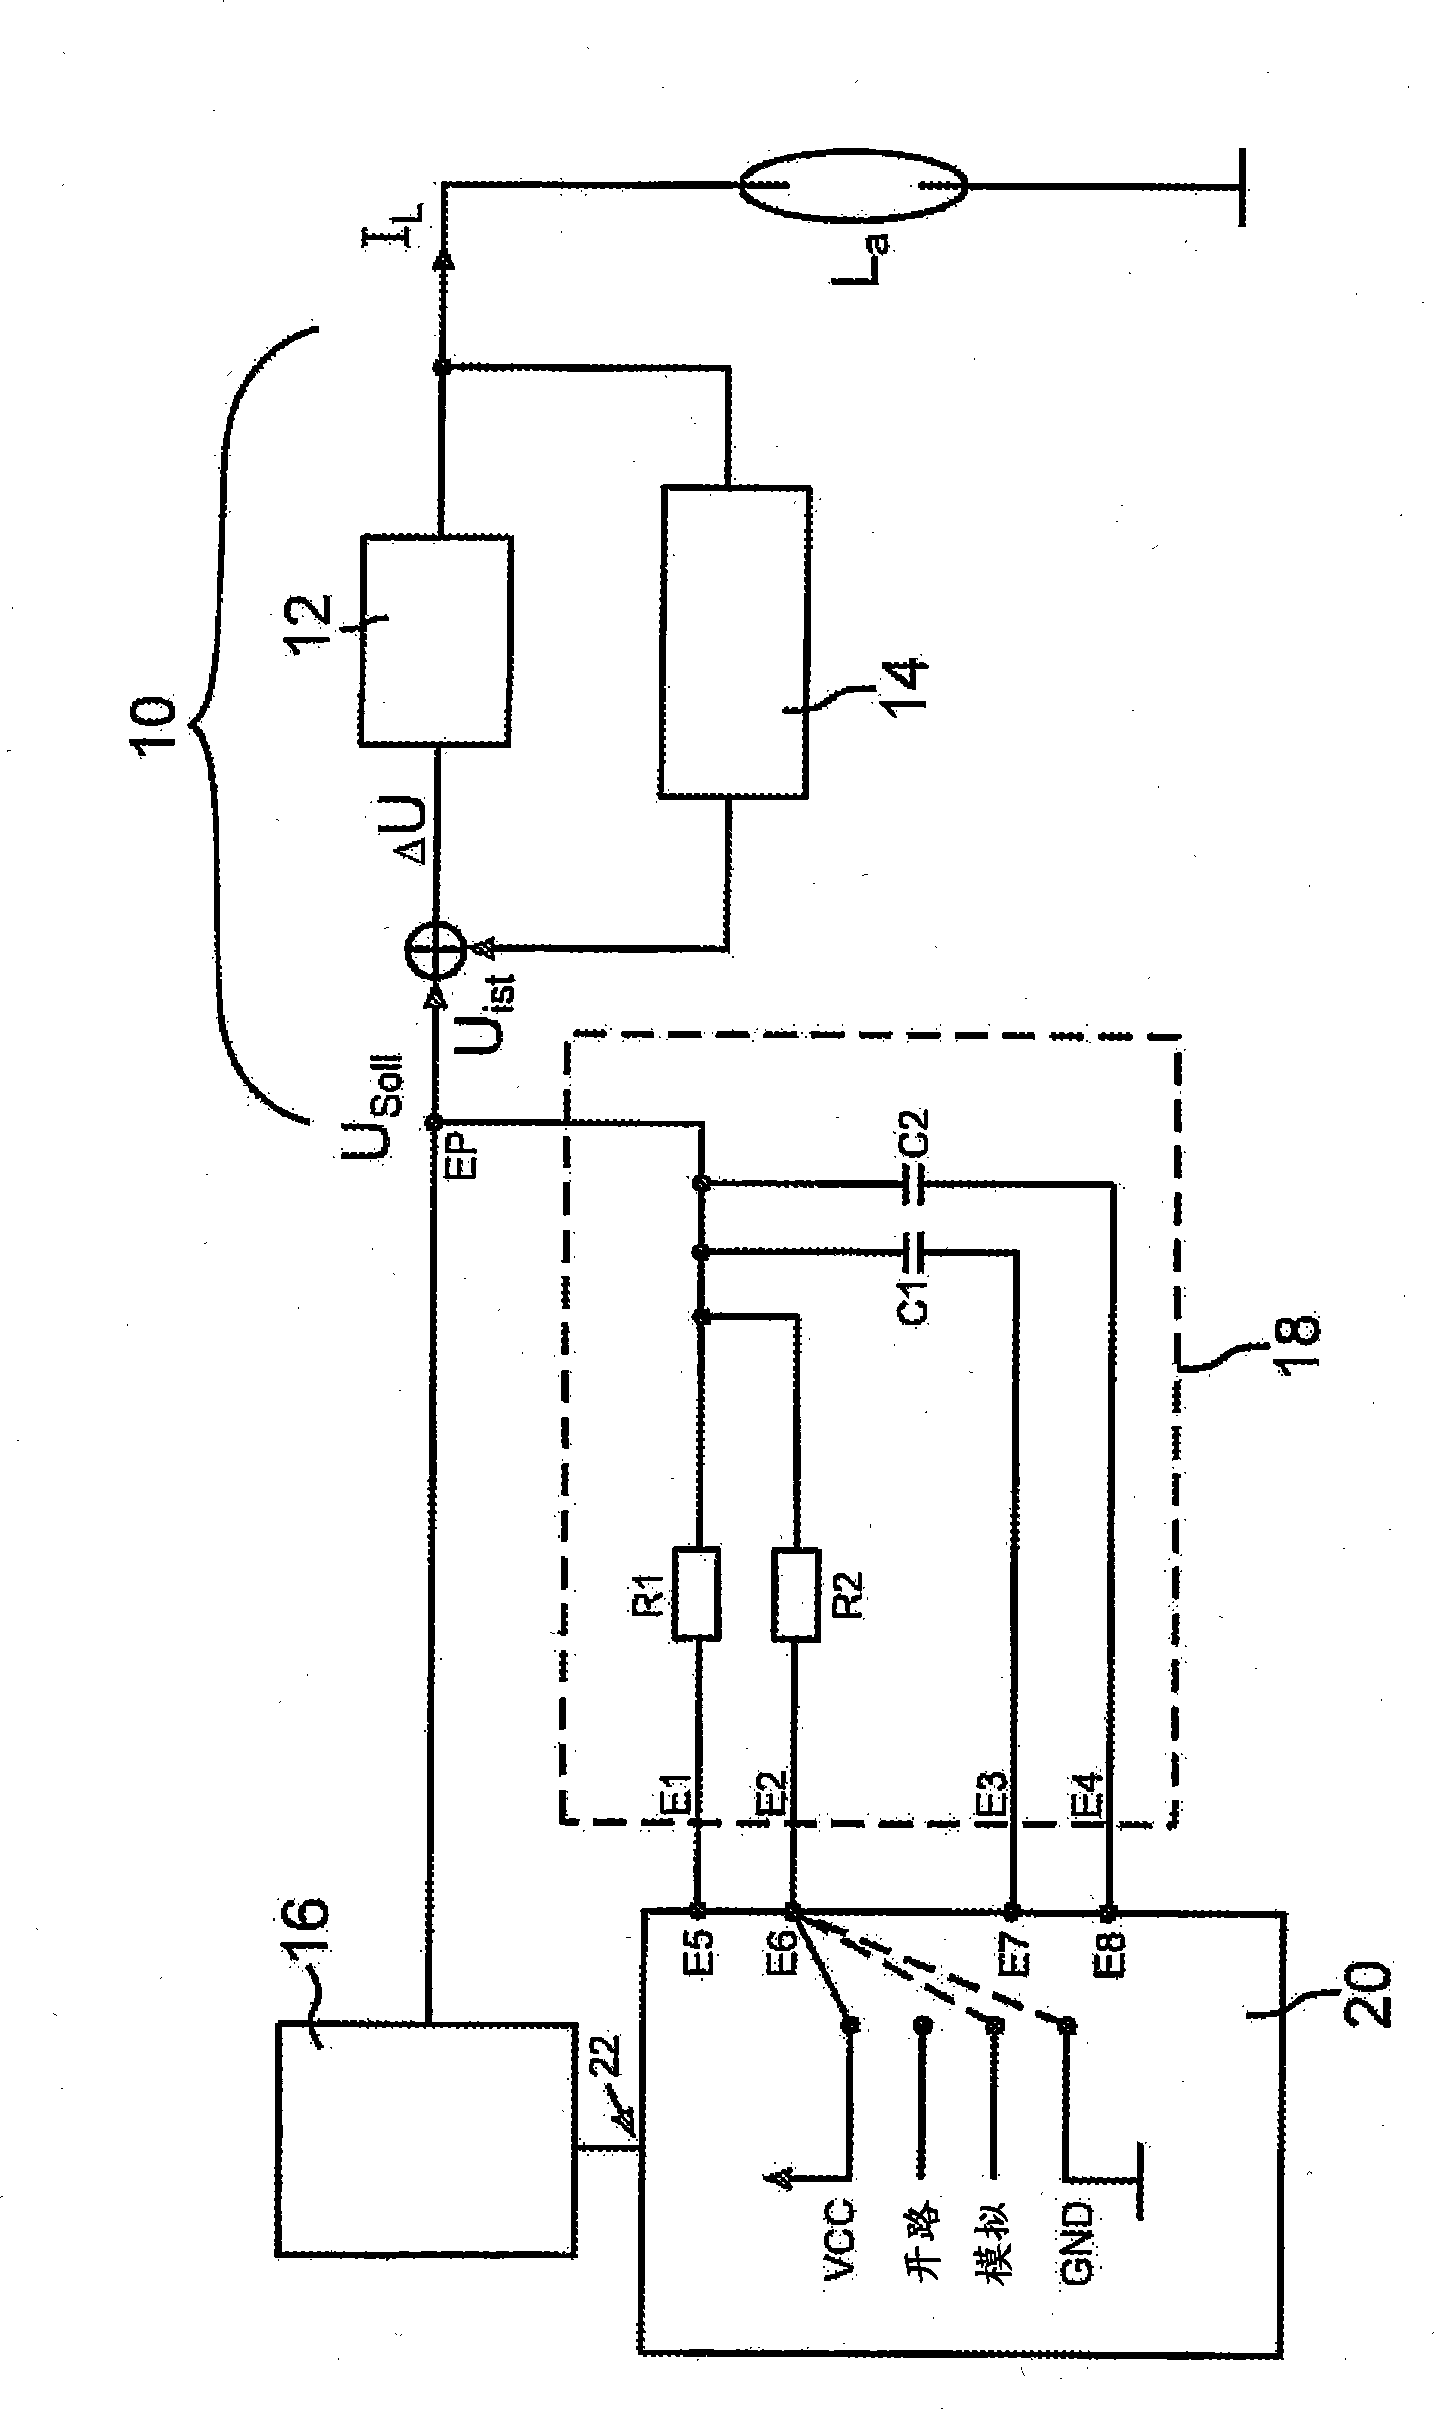 Circuit arrangement and method for regulating current through at least one discharge lamp